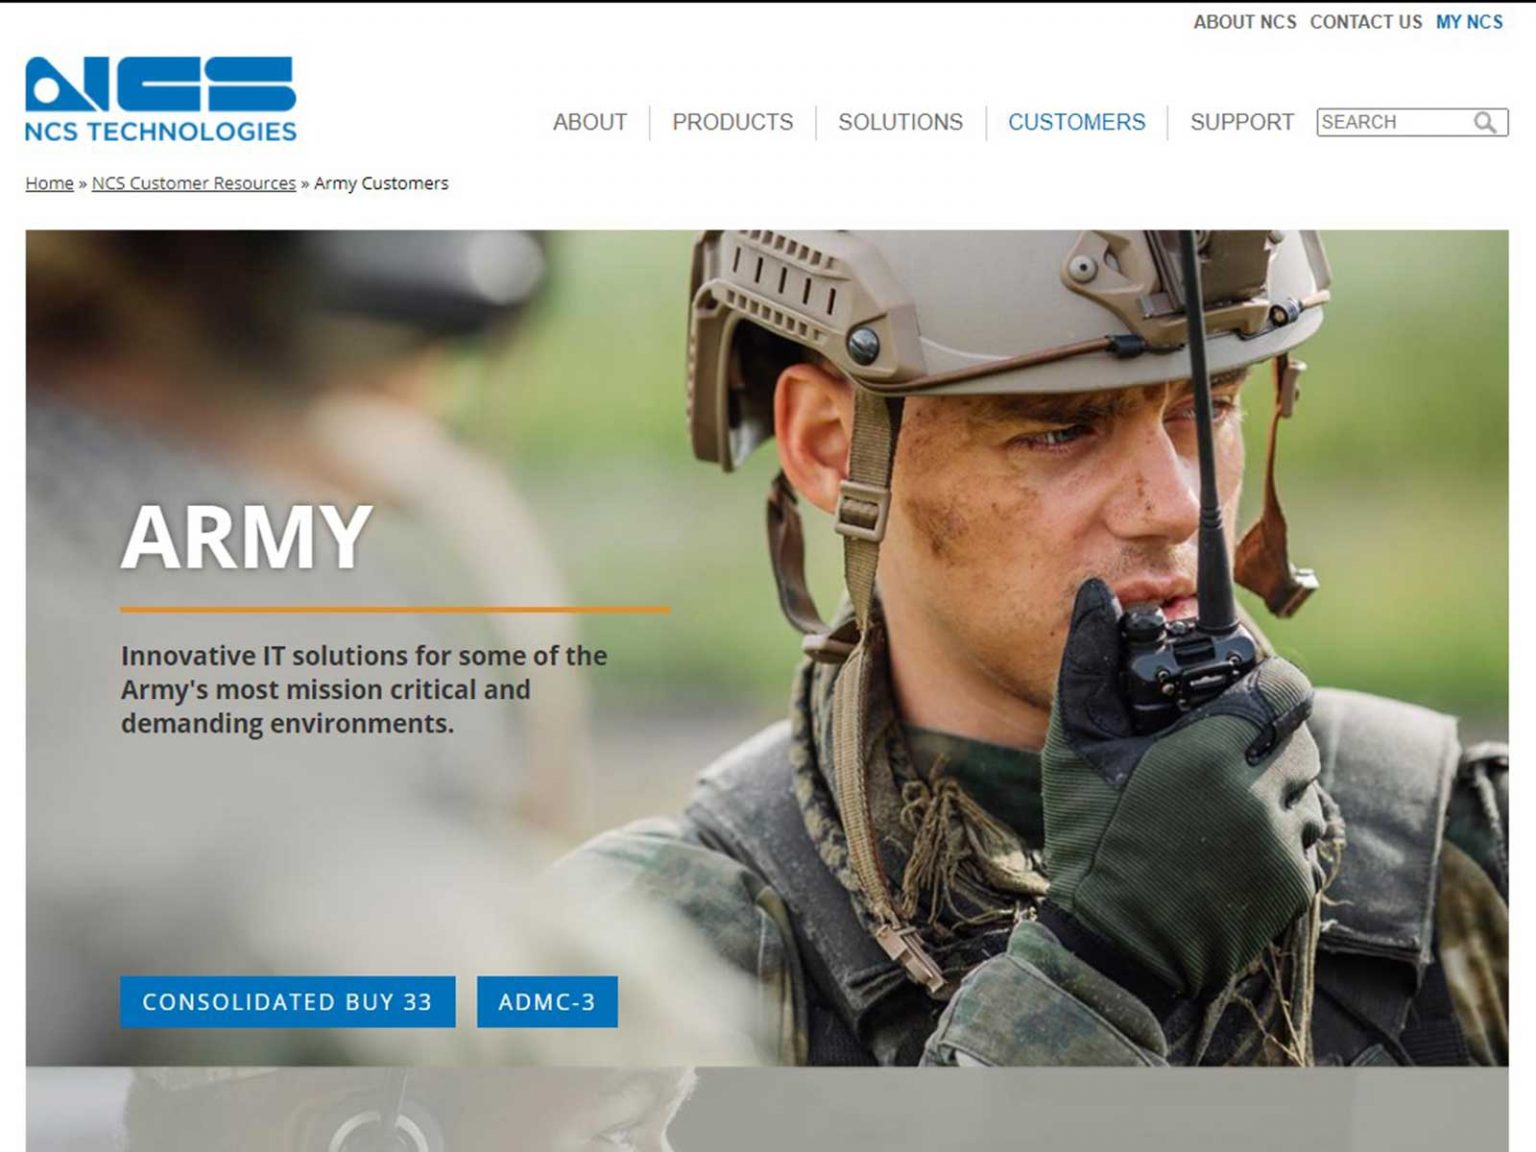 page for Army customers